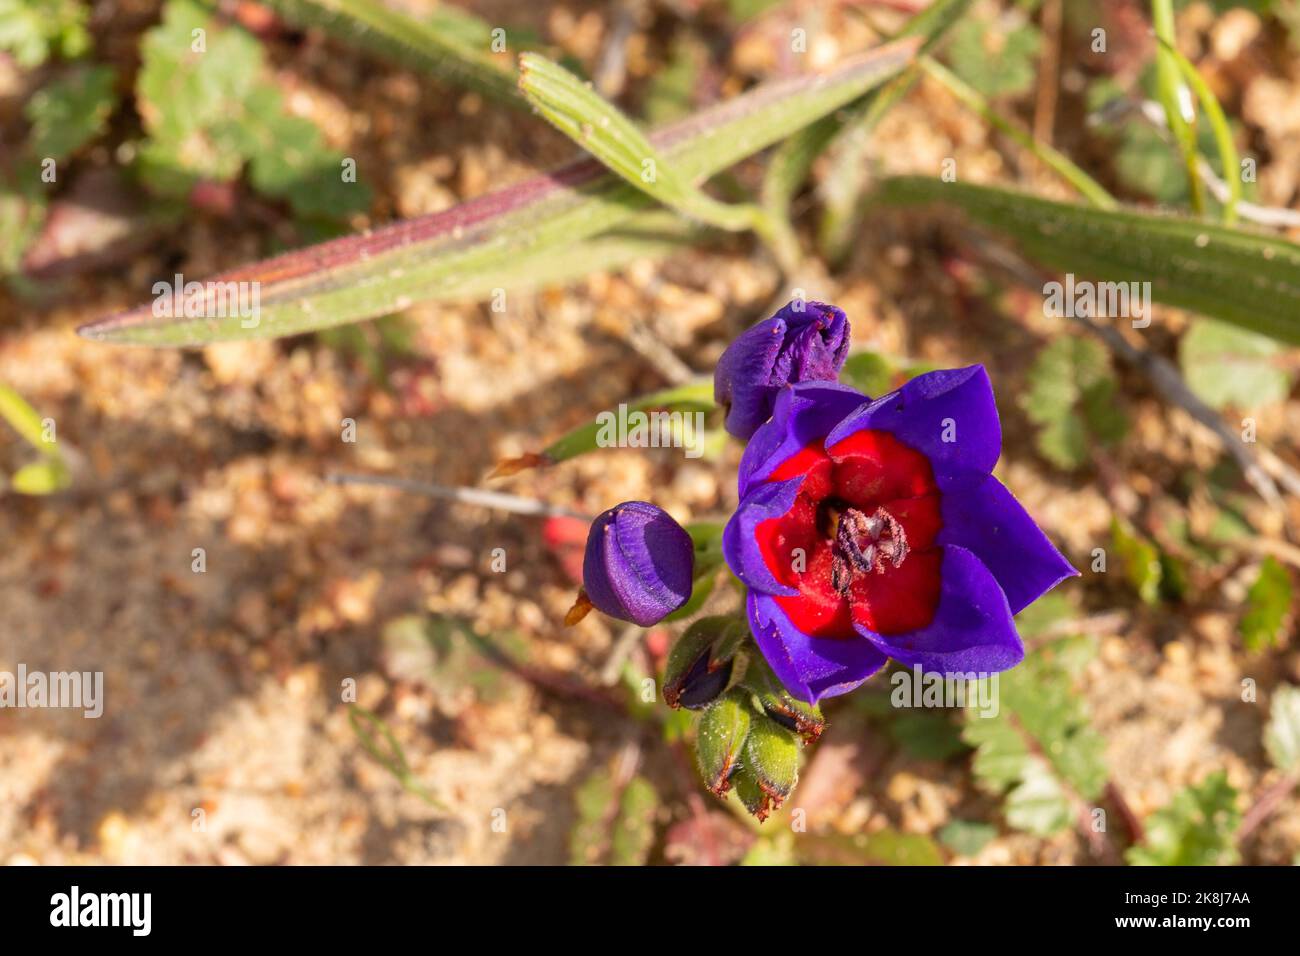 Single flower of Babiana rubrocyanea seen in natural habitat close to Darling in the Western Cape of South Africa Stock Photo